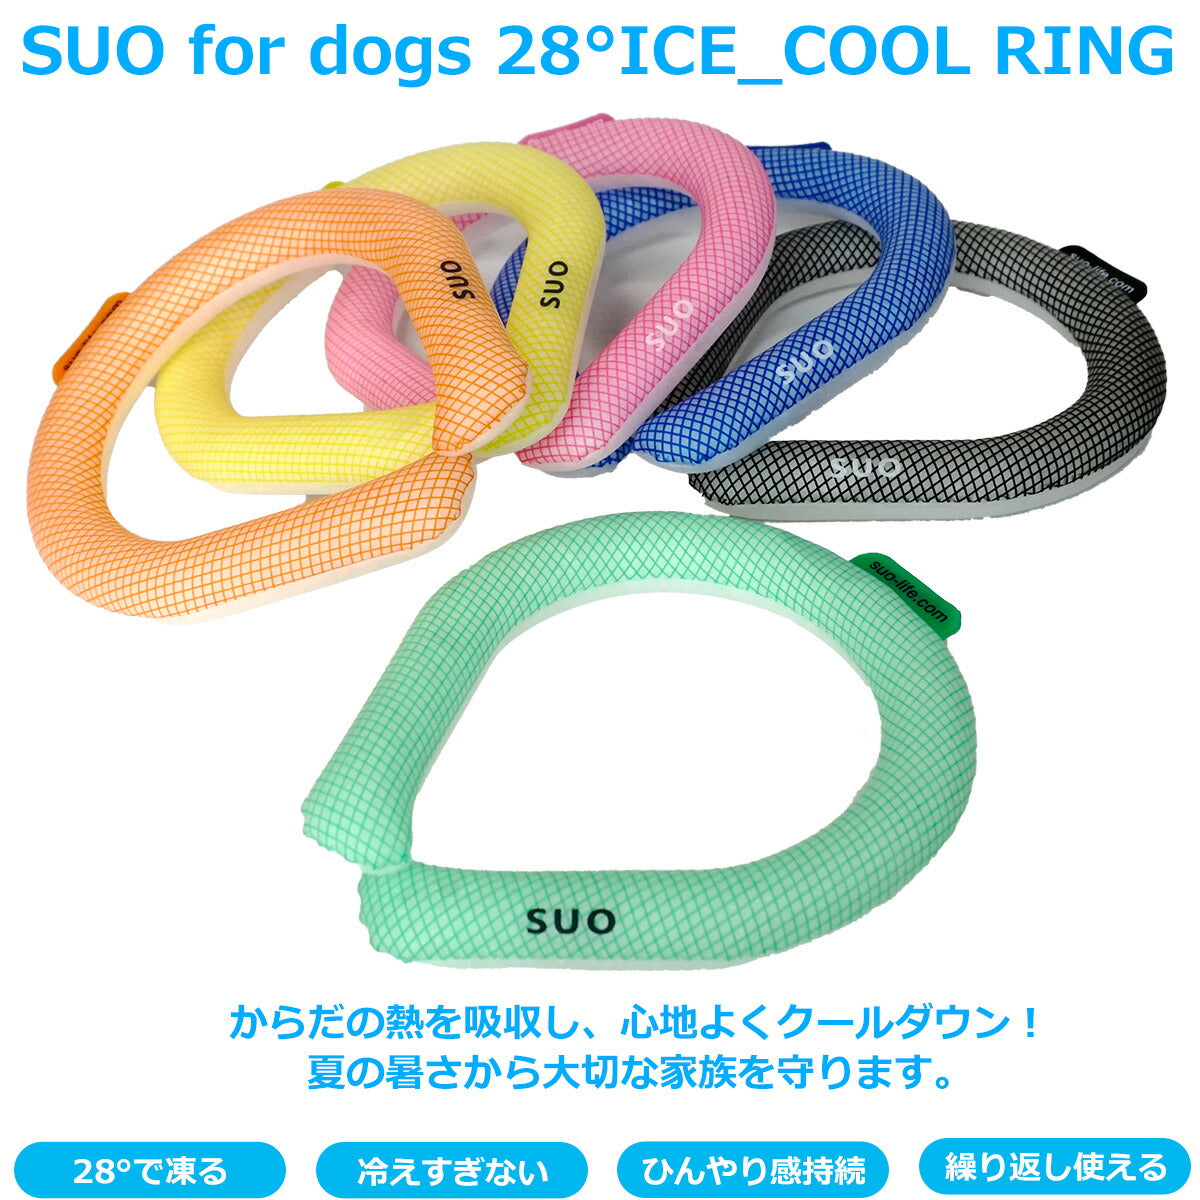 SUO for dogs 28°ICE SUOリング ボタンなし L イエロー 熱中症対策グッズ 暑さ対策 ひんやり 首 冷感 犬 大人 子供